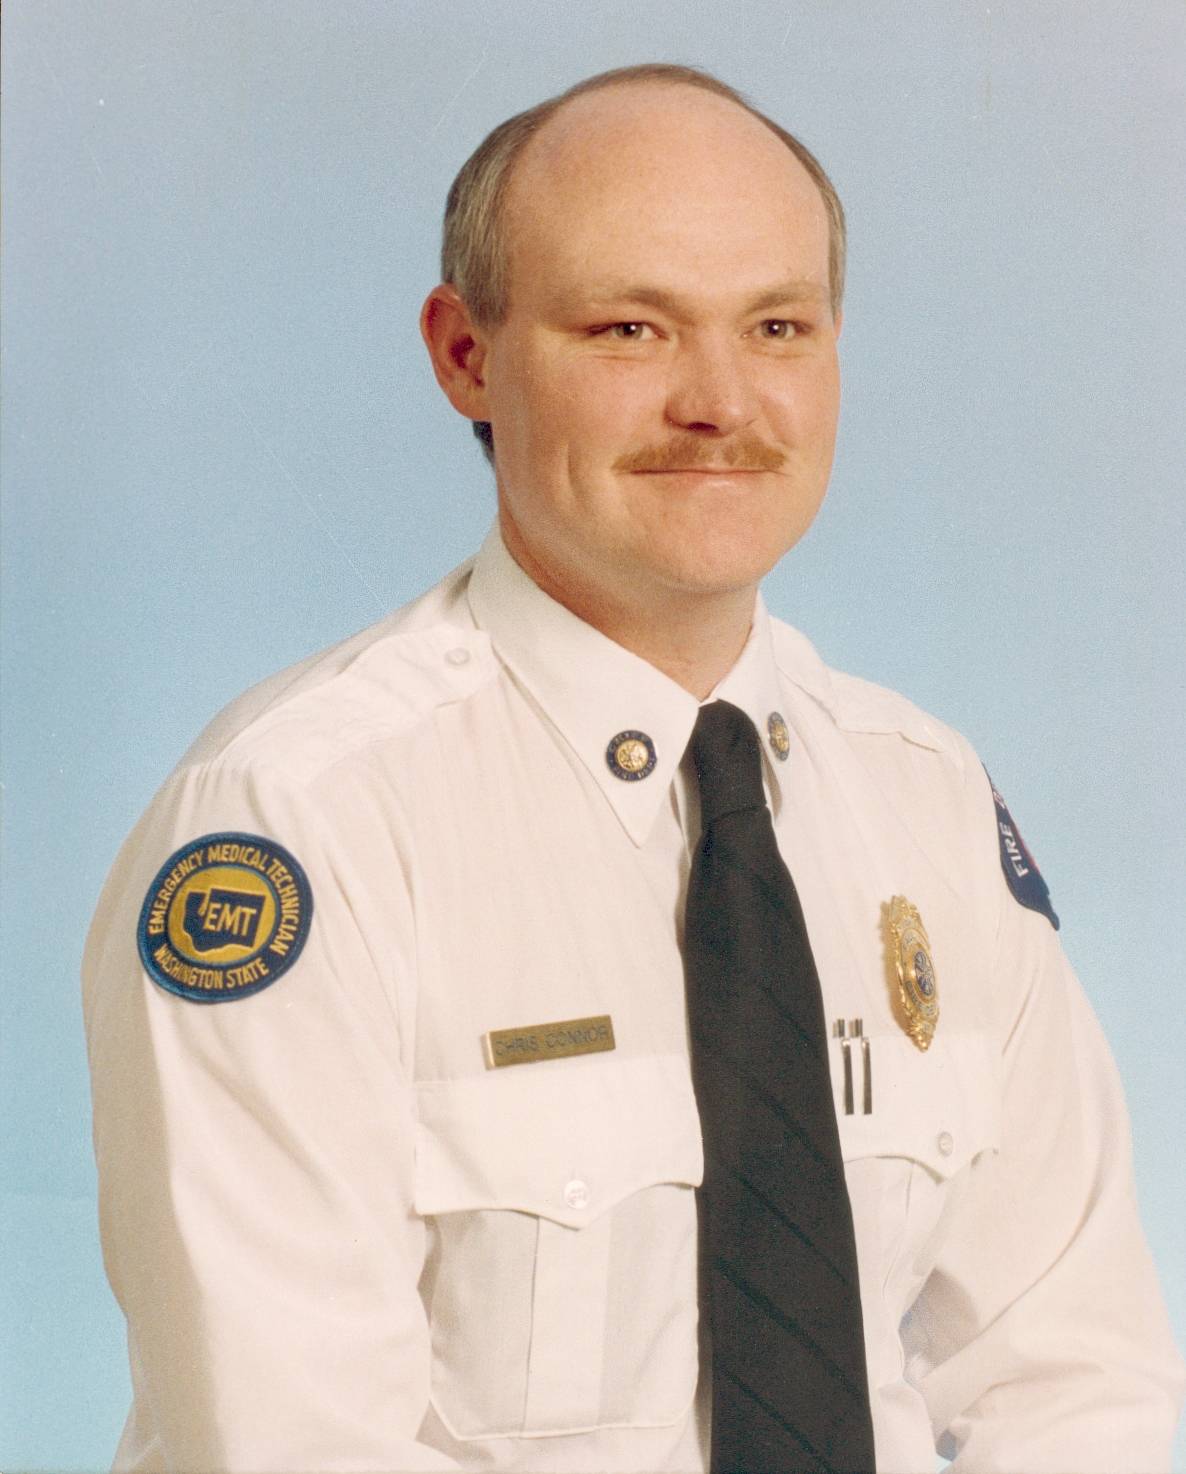 Contributed photo
Fall City Fire Chief Chris Connor is retiring on Feb. 26, 2021 after 40 years with the department.